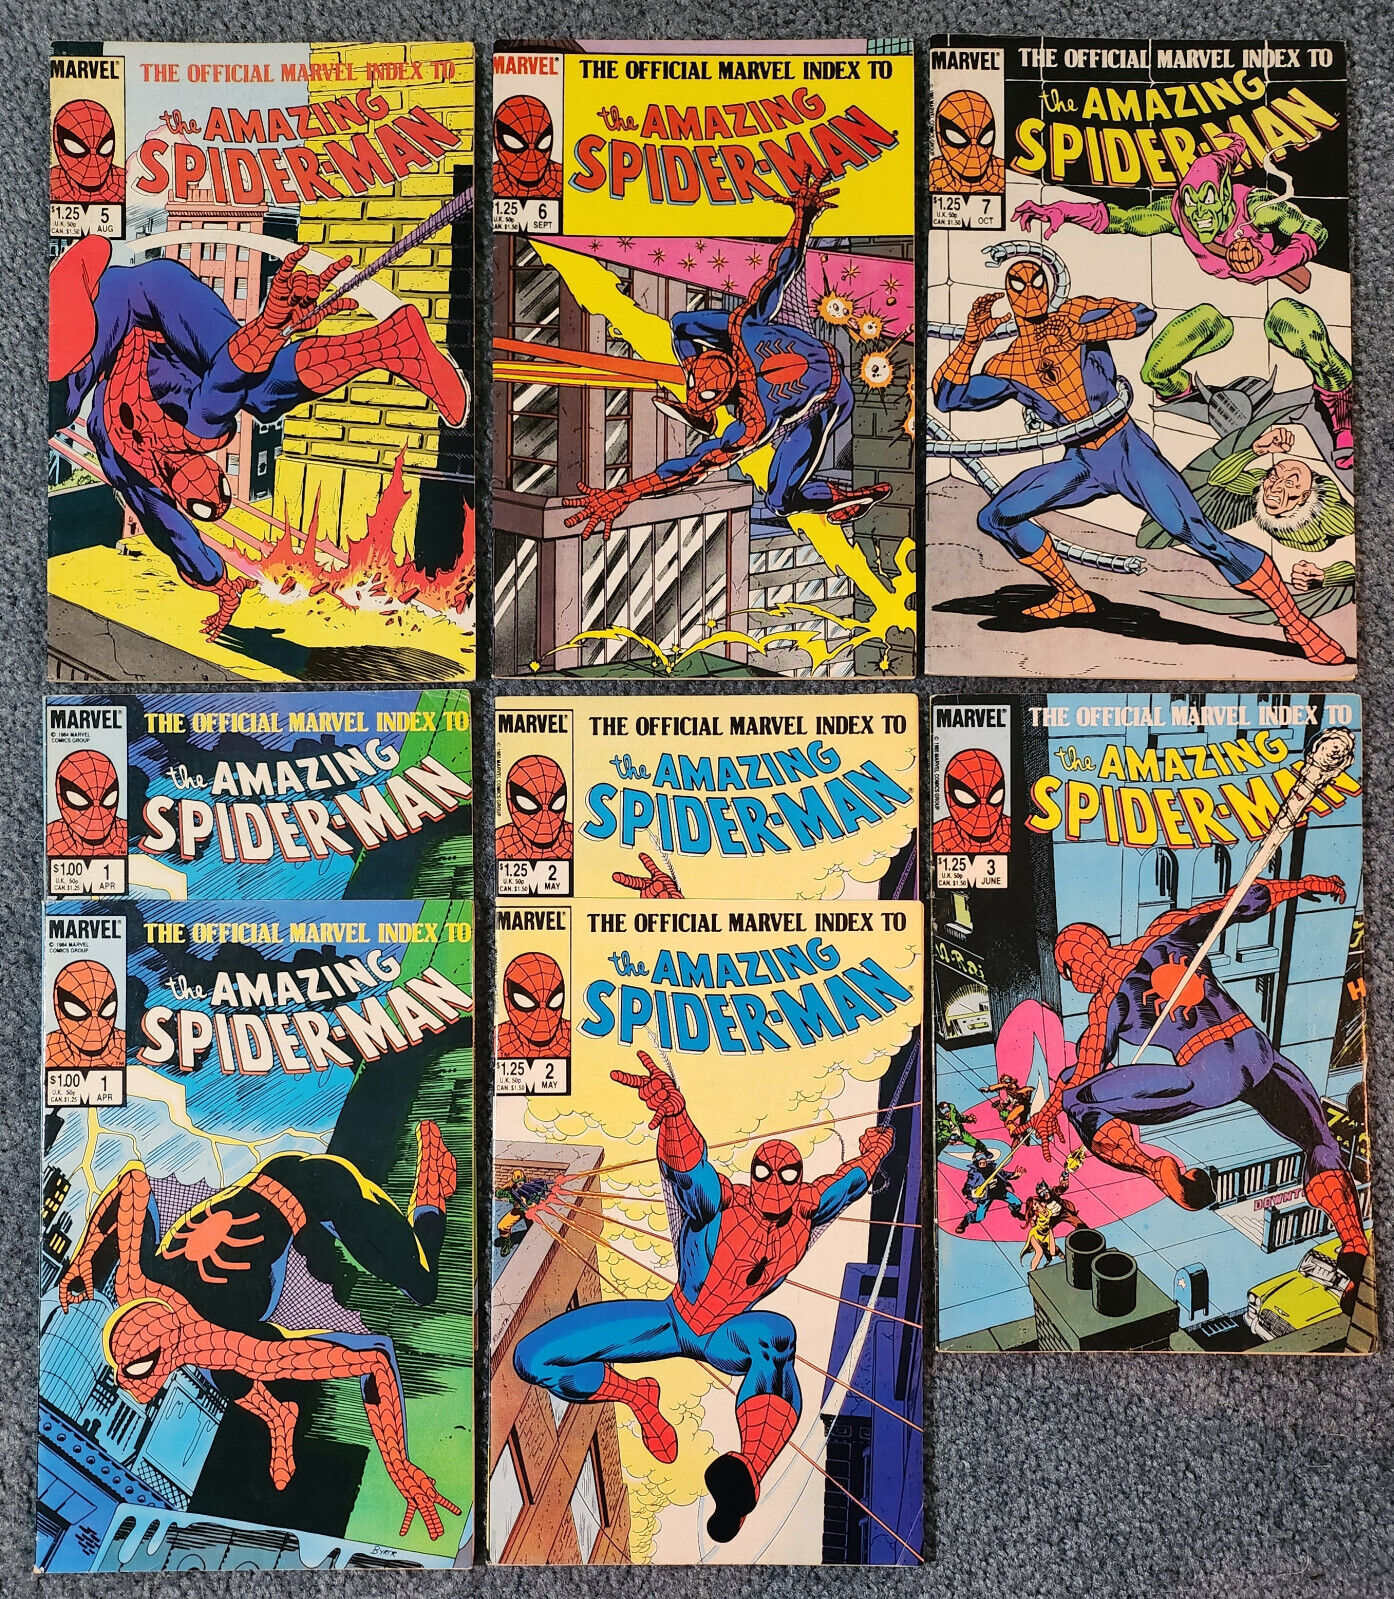 OFFICIAL MARVEL INDEX TO THE AMAZING SPIDER-MAN #1(2),2(2),3,5-7 Lot of 8 1985